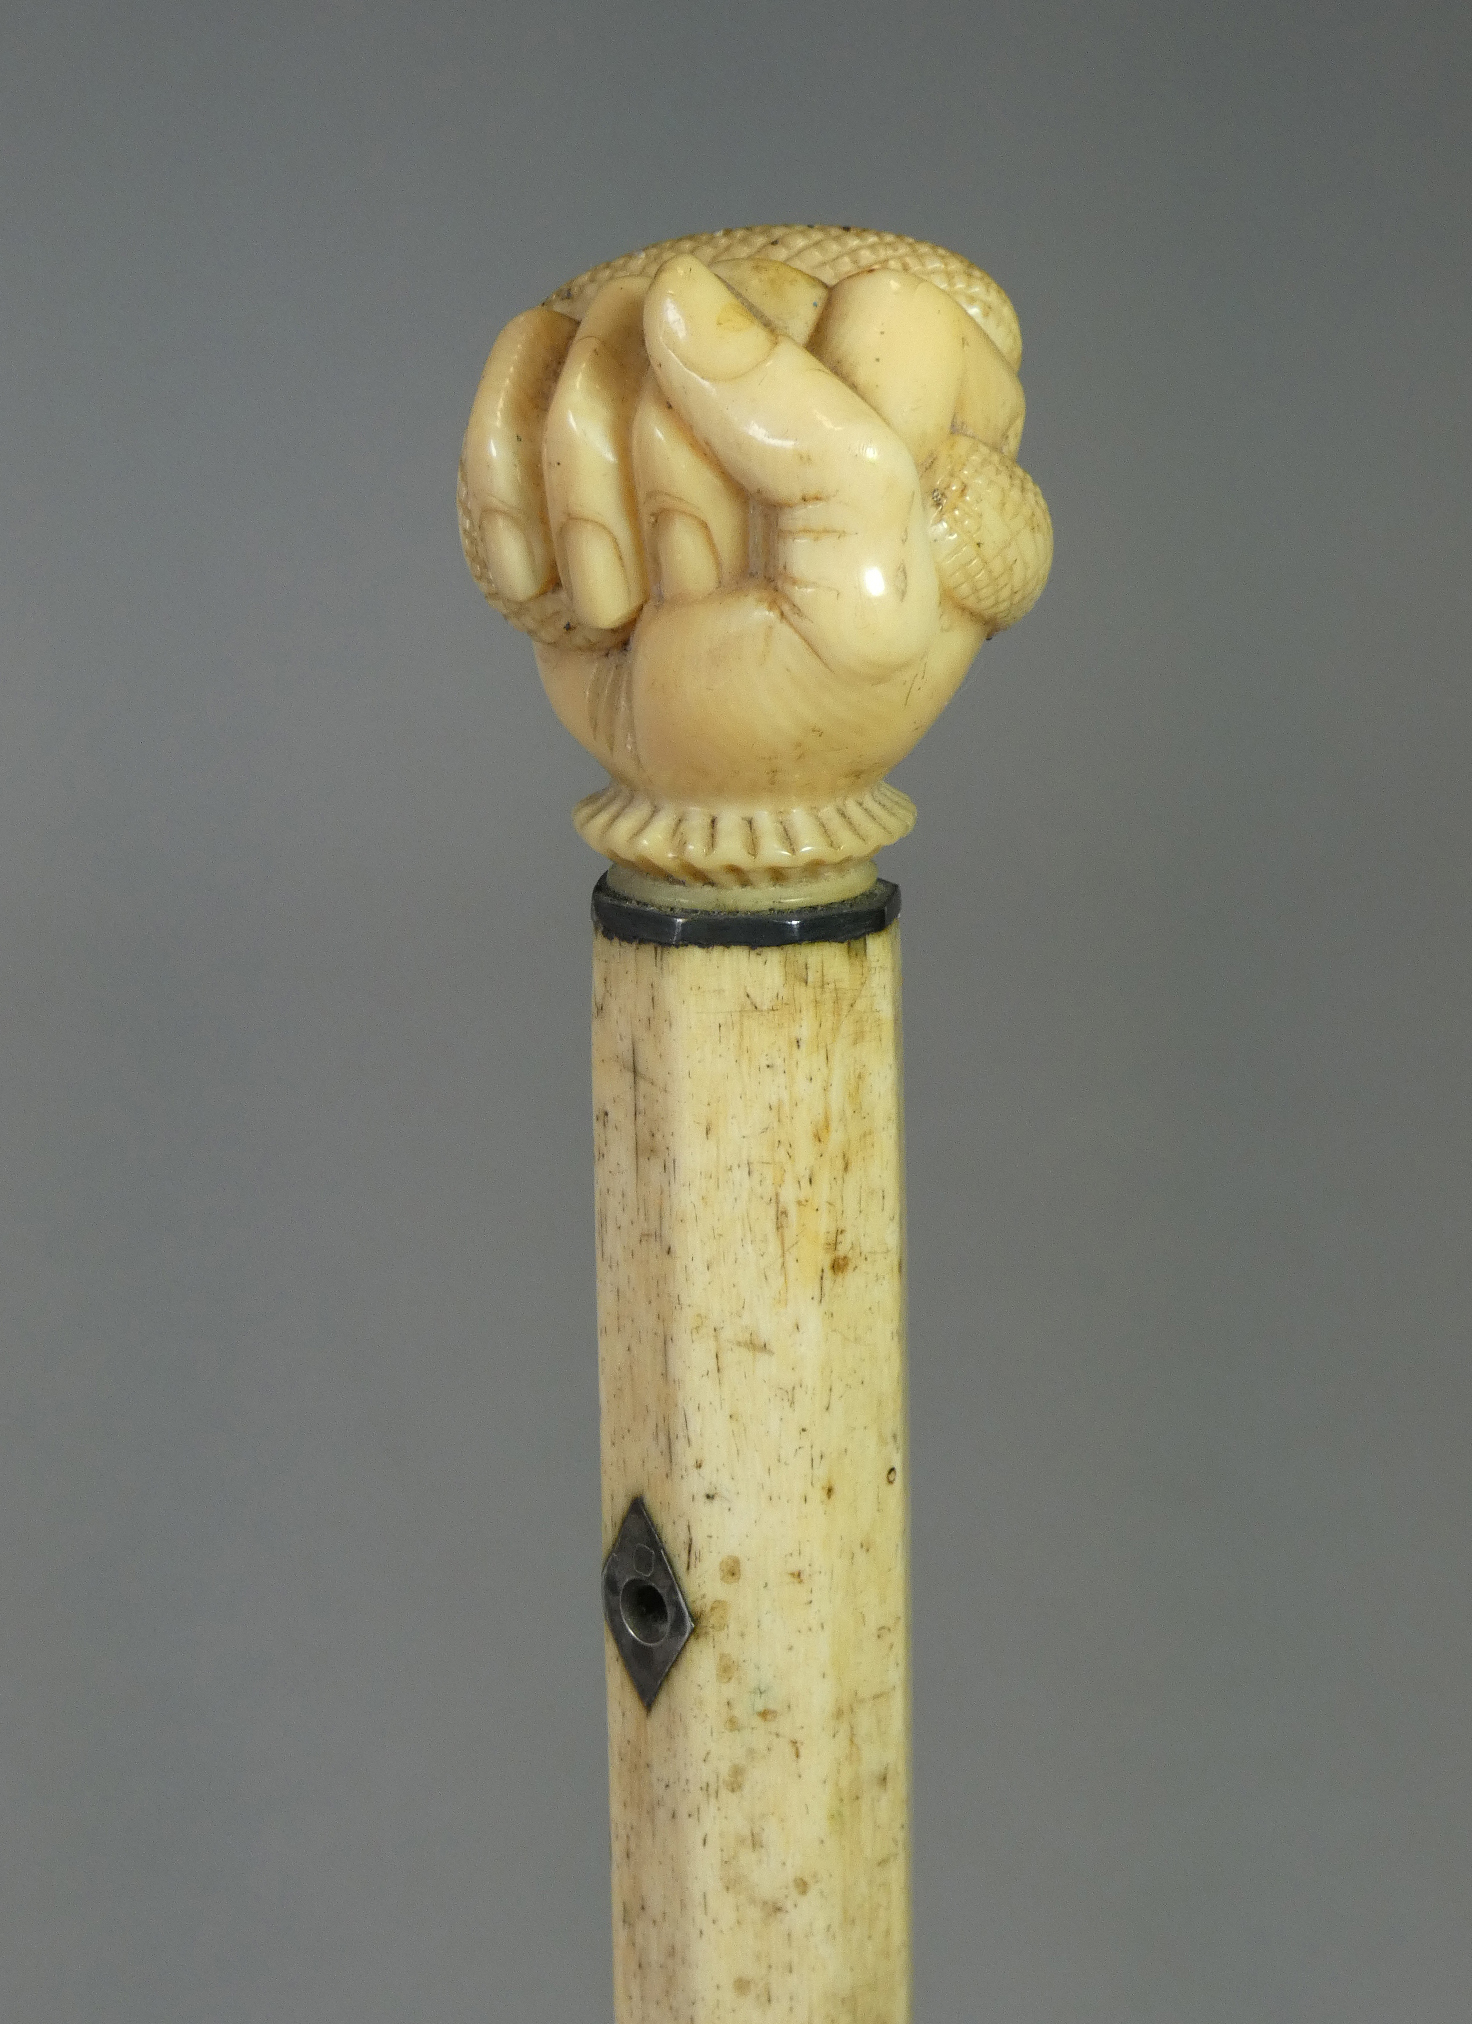 A 19th century whale jaw-bone & ivory-handled walking stick carved with a fist clutching a